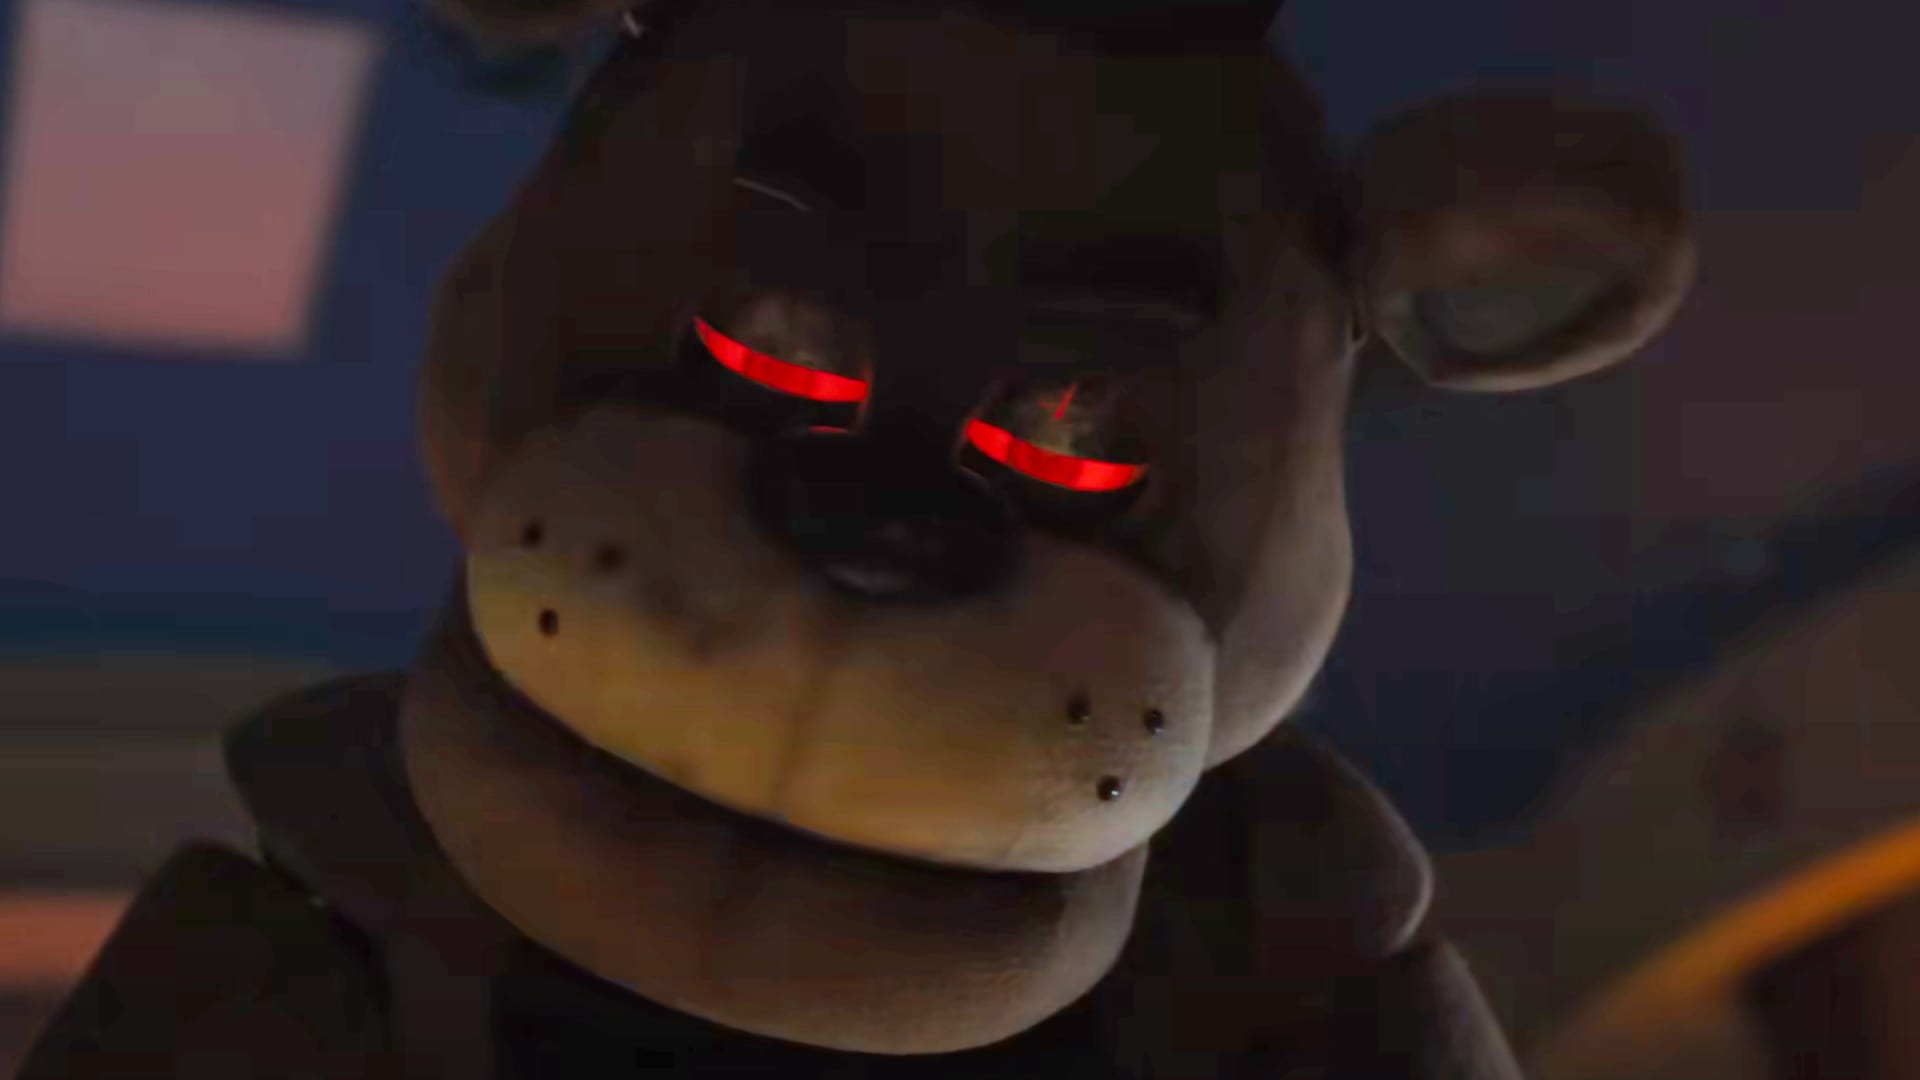 ‘Five Nights at Freddy’s’ dominates Halloween box office